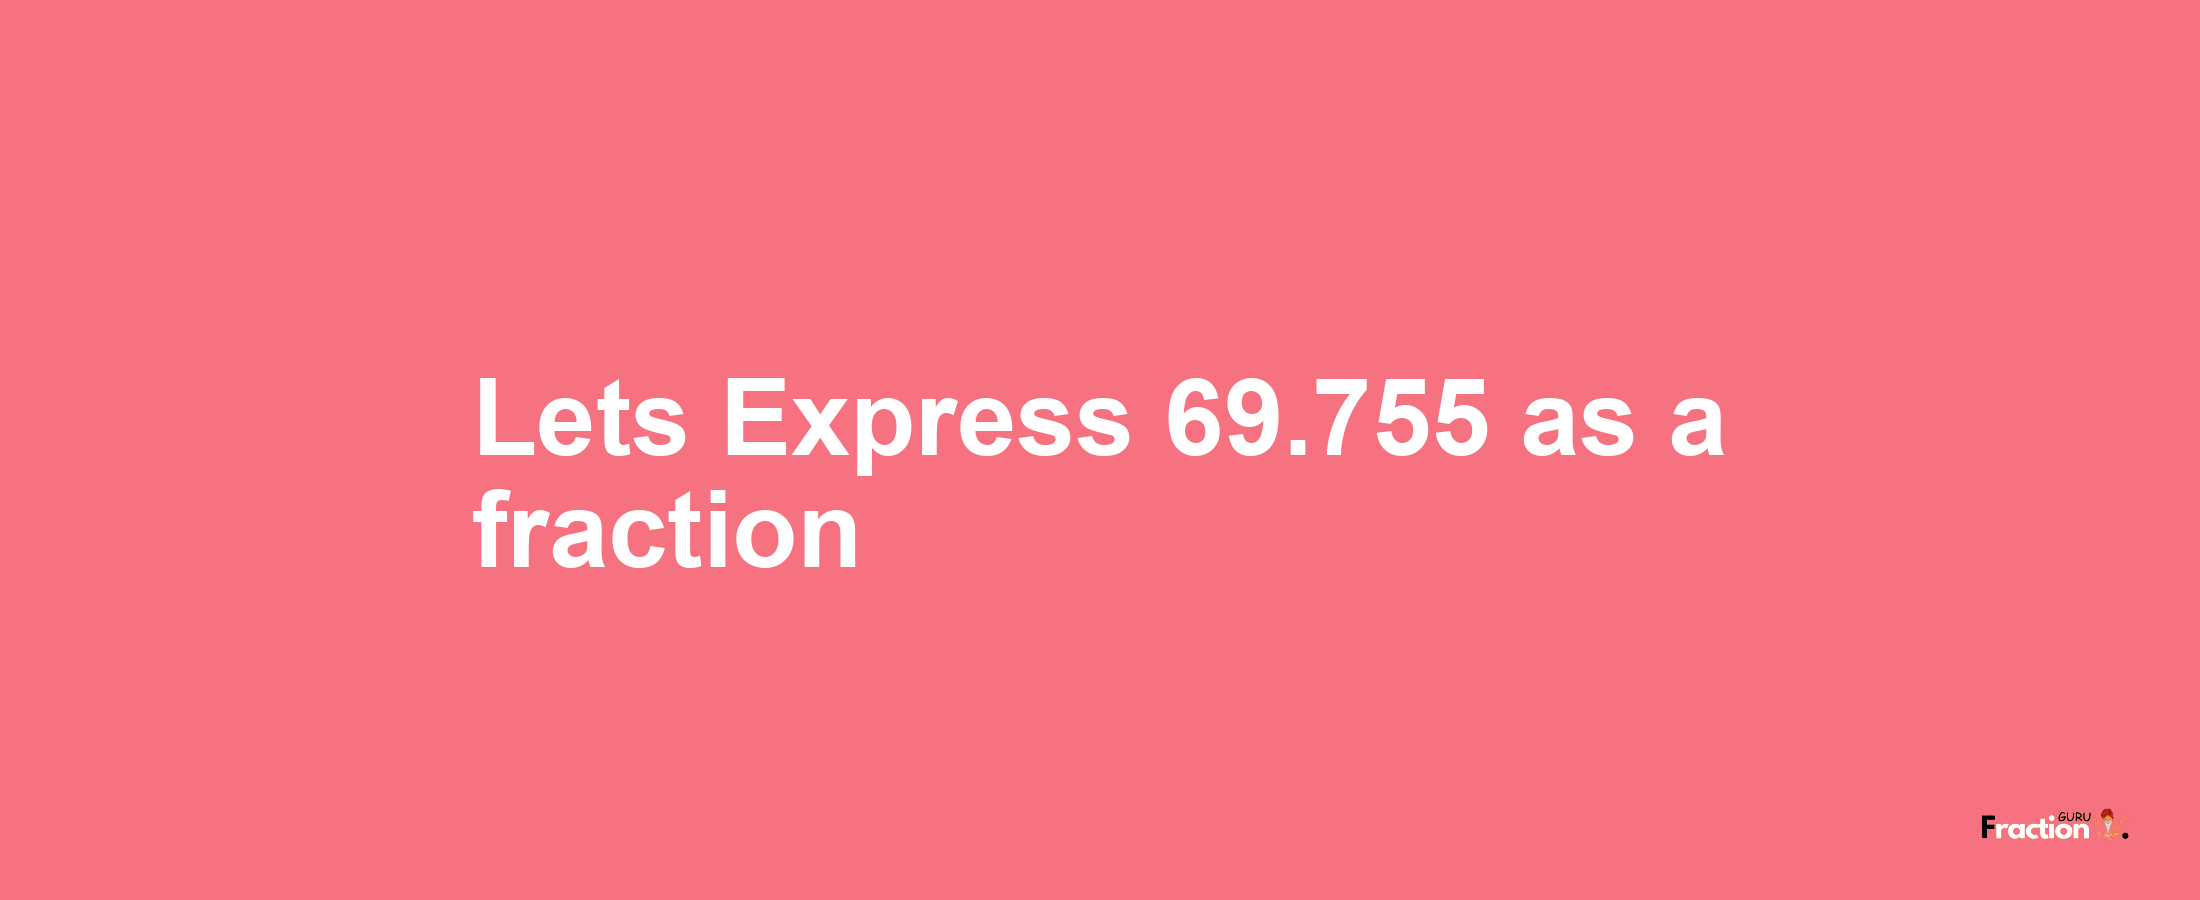 Lets Express 69.755 as afraction